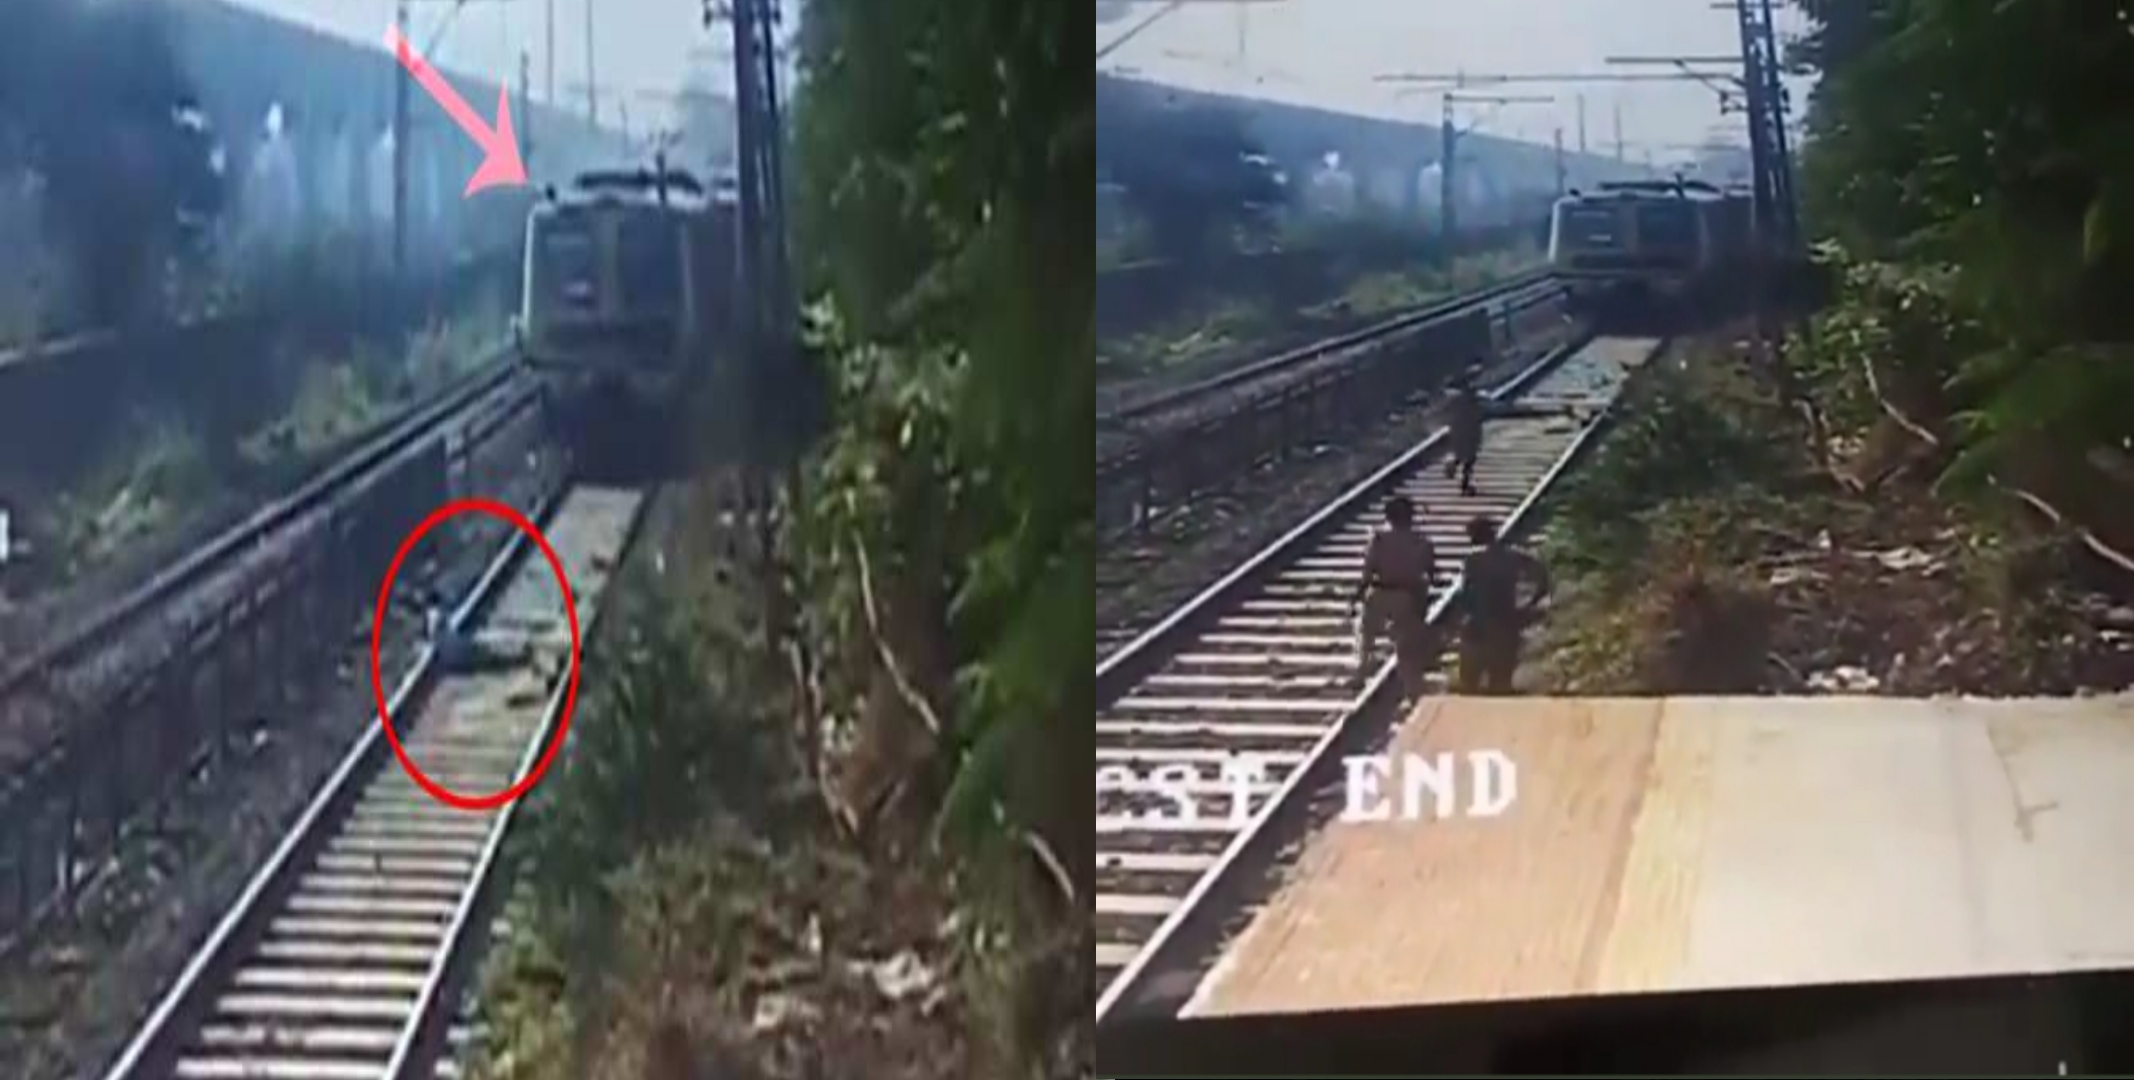 The man lay down with his neck on the track in front of the moving train, after that the train driver did wonders